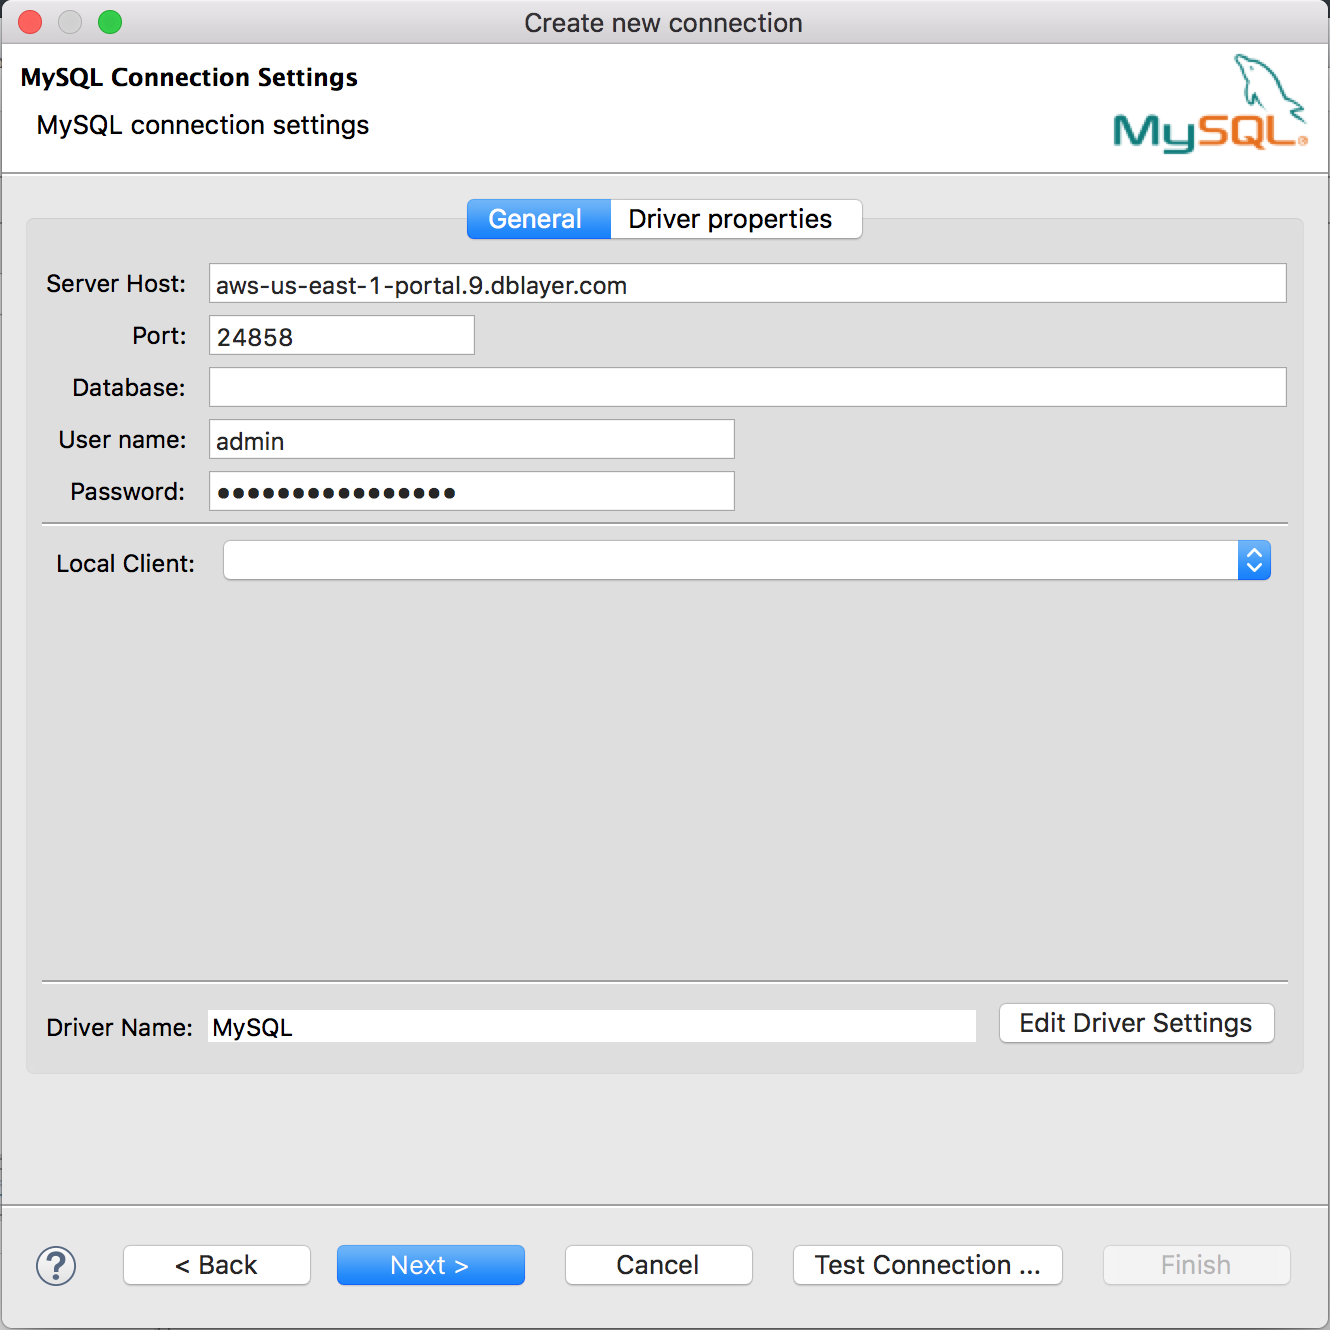 Sample connection settings for a Compose for MySQL deployment